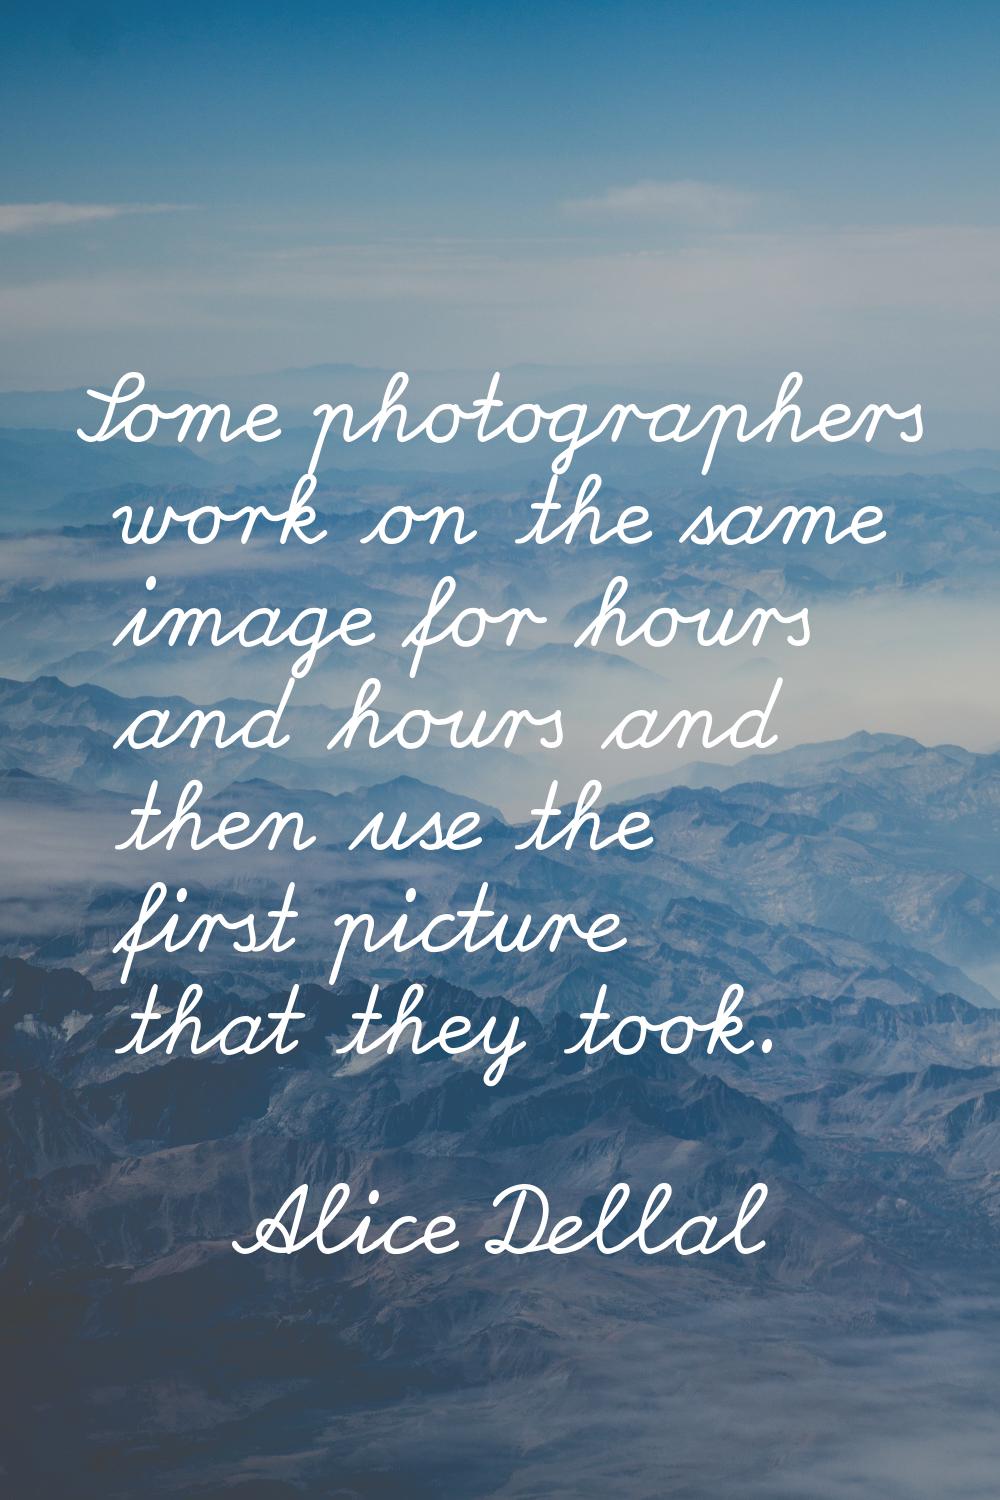 Some photographers work on the same image for hours and hours and then use the first picture that t